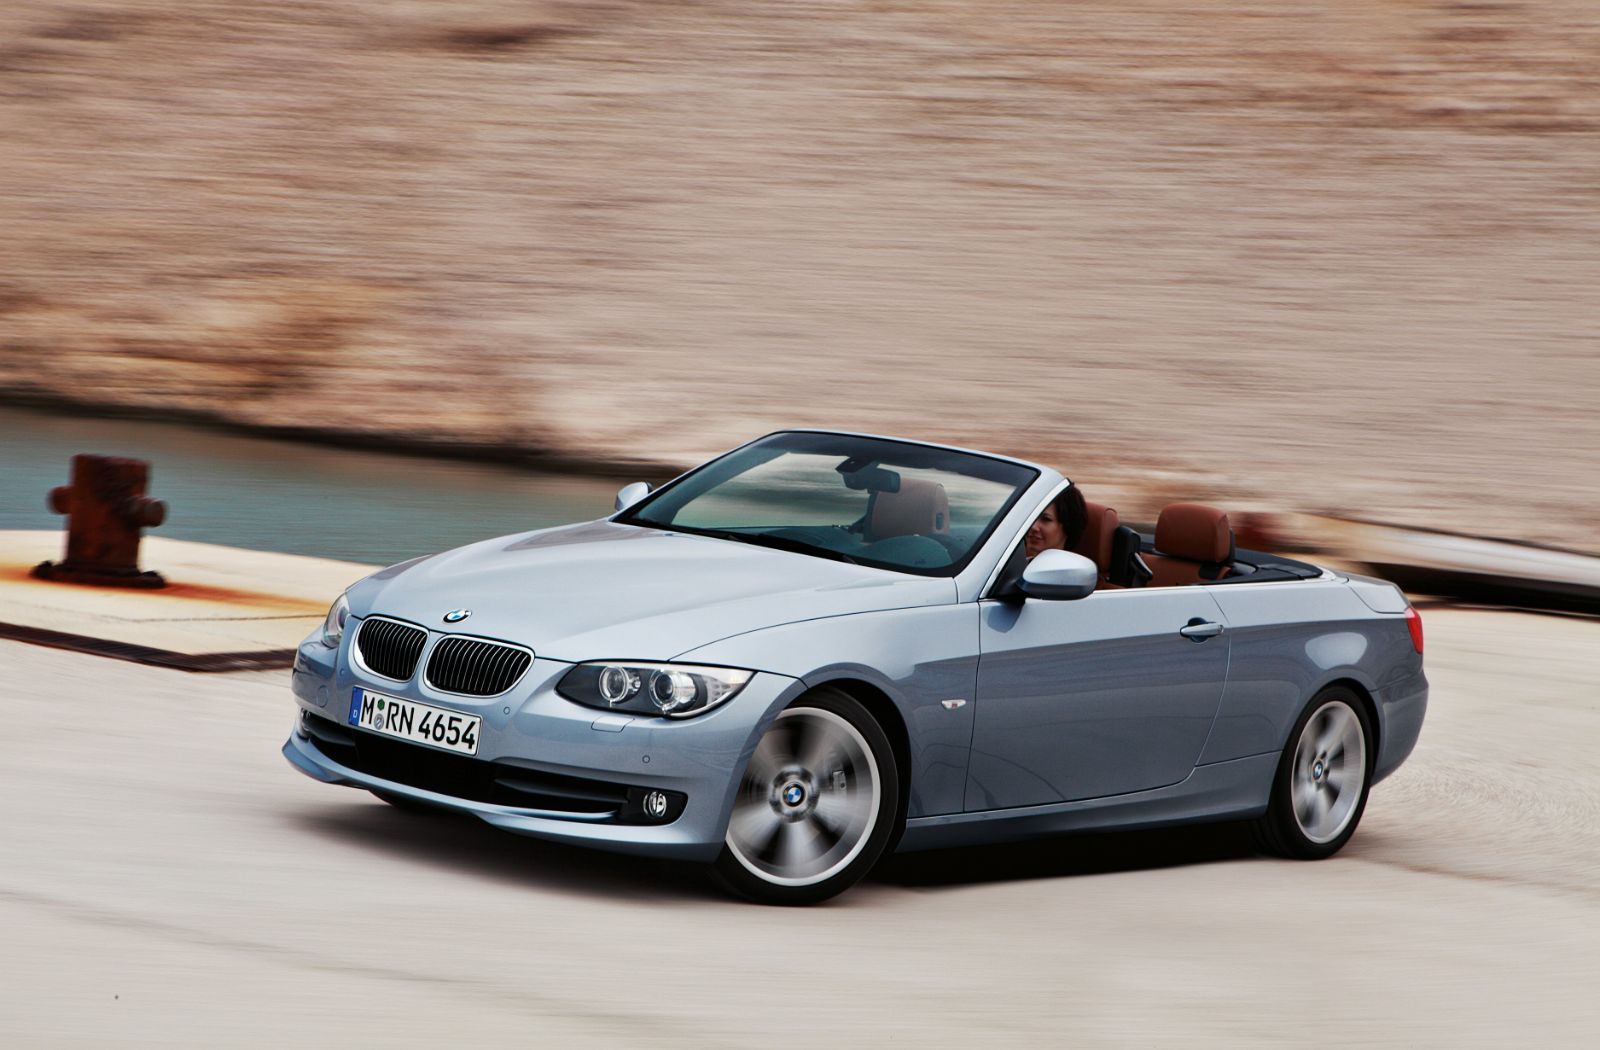 https://s1.cdn.autoevolution.com/images/news/5-reasons-why-the-e93-bmw-3-series-is-the-best-used-convertible-you-can-buy-this-summer-215624_1.jpg